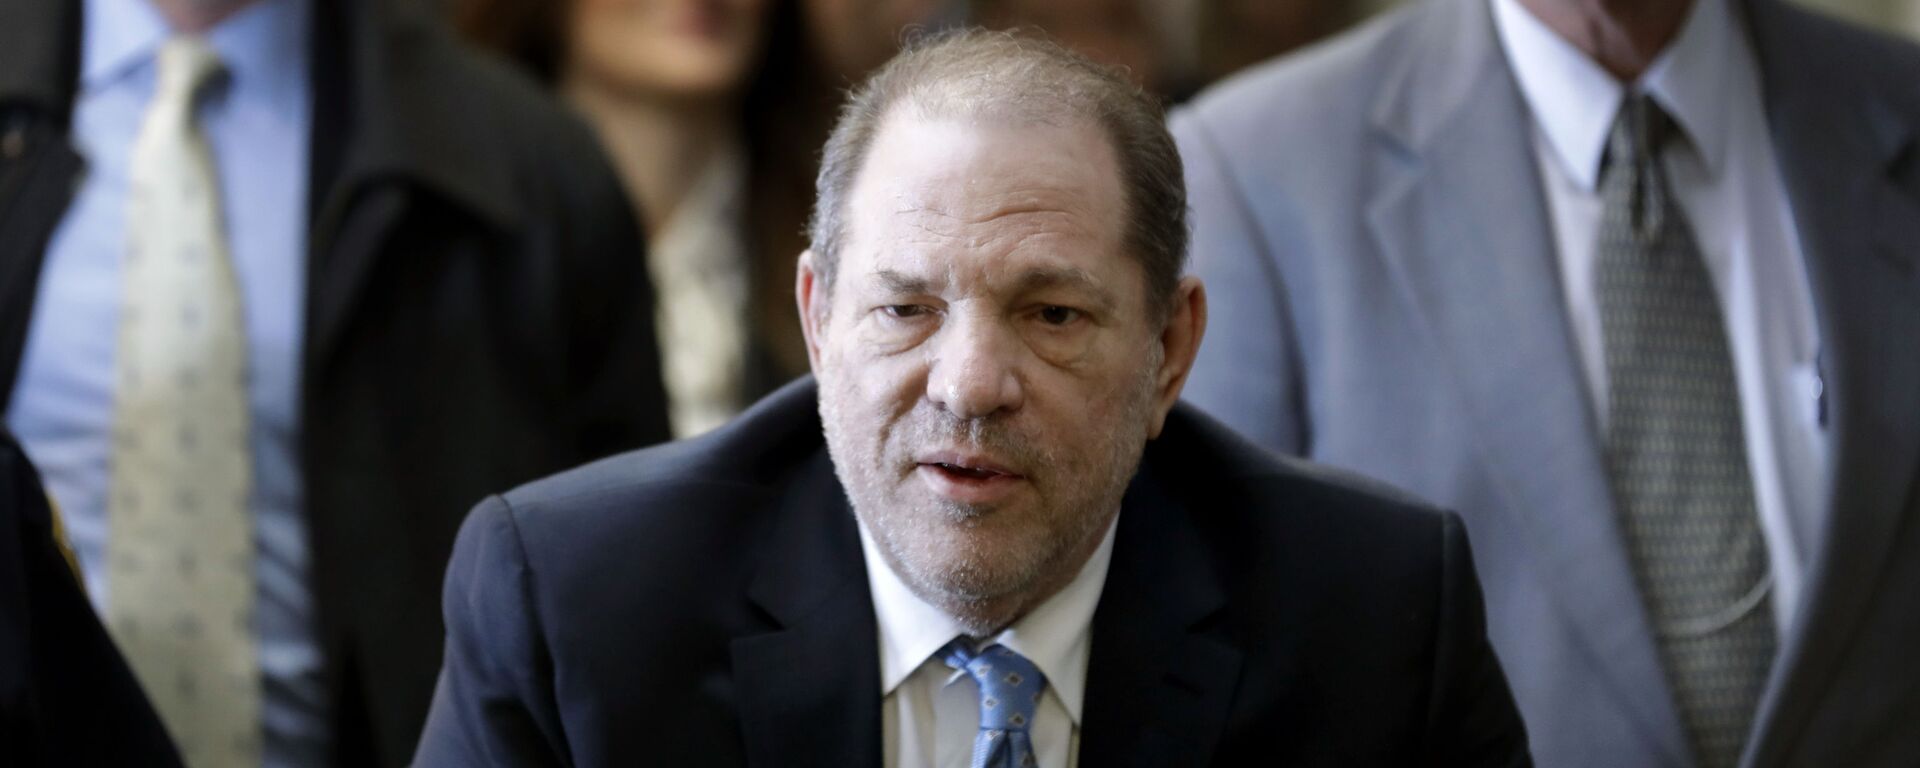 In this Feb. 24, 2020, file photo, Harvey Weinstein arrives at a Manhattan courthouse as jury deliberations continue in his rape trial in New York. The disgraced Hollywood film mogul and convicted rapist is asking a bankruptcy judge in Delaware to allow him to pursue arbitration in New York over what he claims is his wrongful termination from the company he co-founded. - Sputnik International, 1920, 18.11.2020